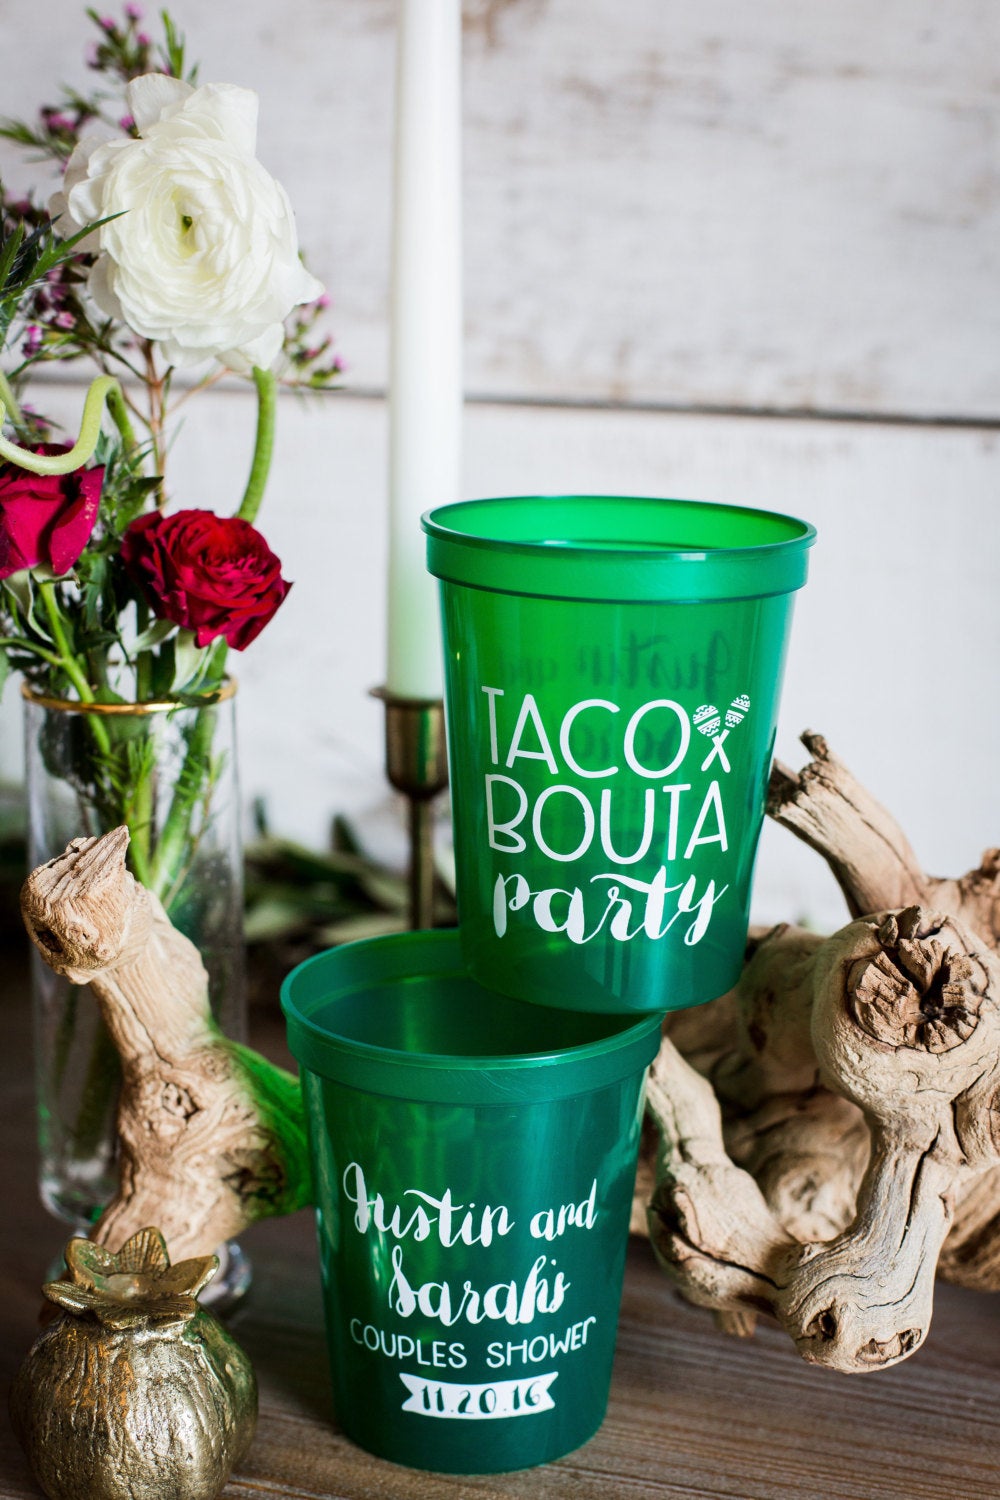 Couples Shower Taco Bouta Party Stadium Cup Design #1431